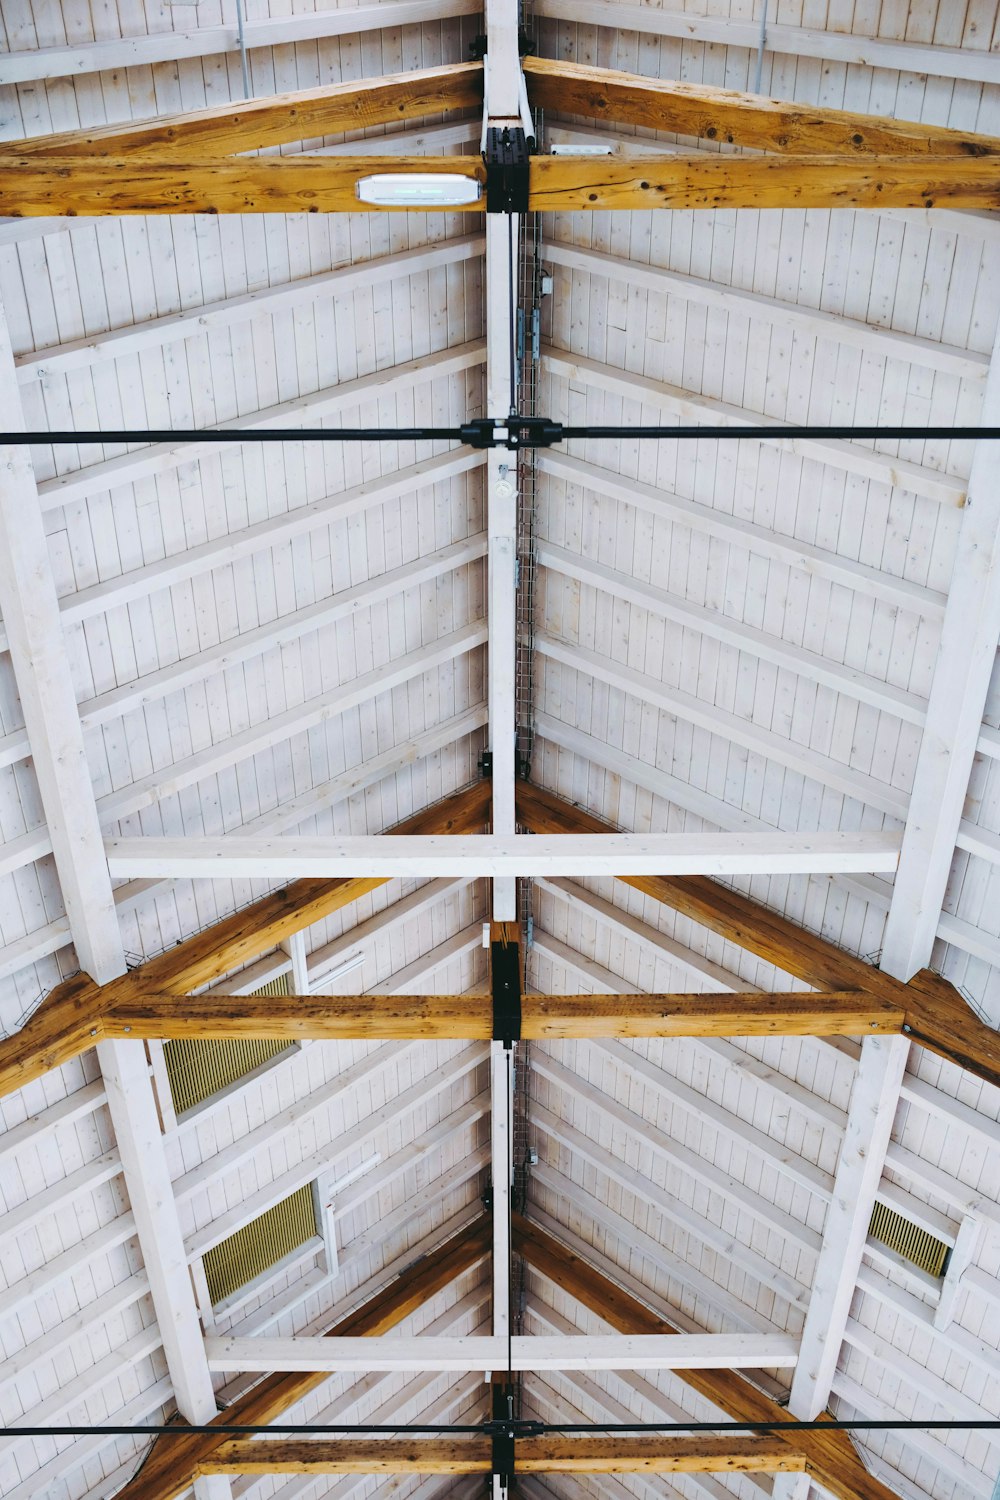 the ceiling of a building with wooden beams